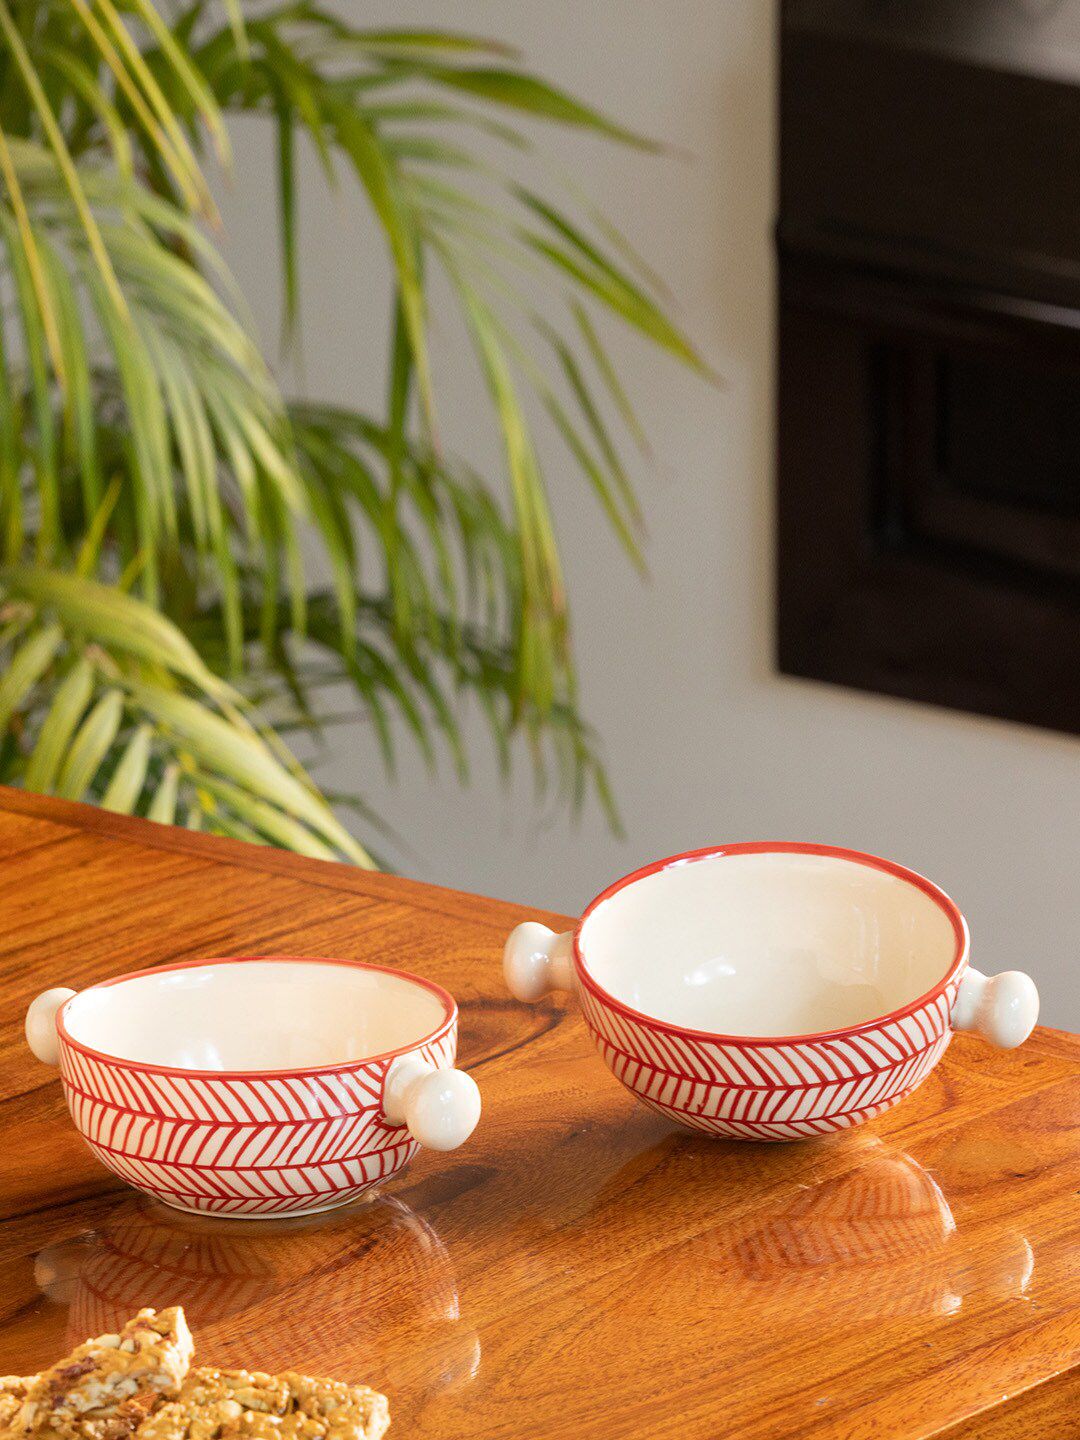 ExclusiveLane Red & Cream-Coloured Set of 2 Pieces Hand Painted Printed Ceramic Glossy Bowls Price in India